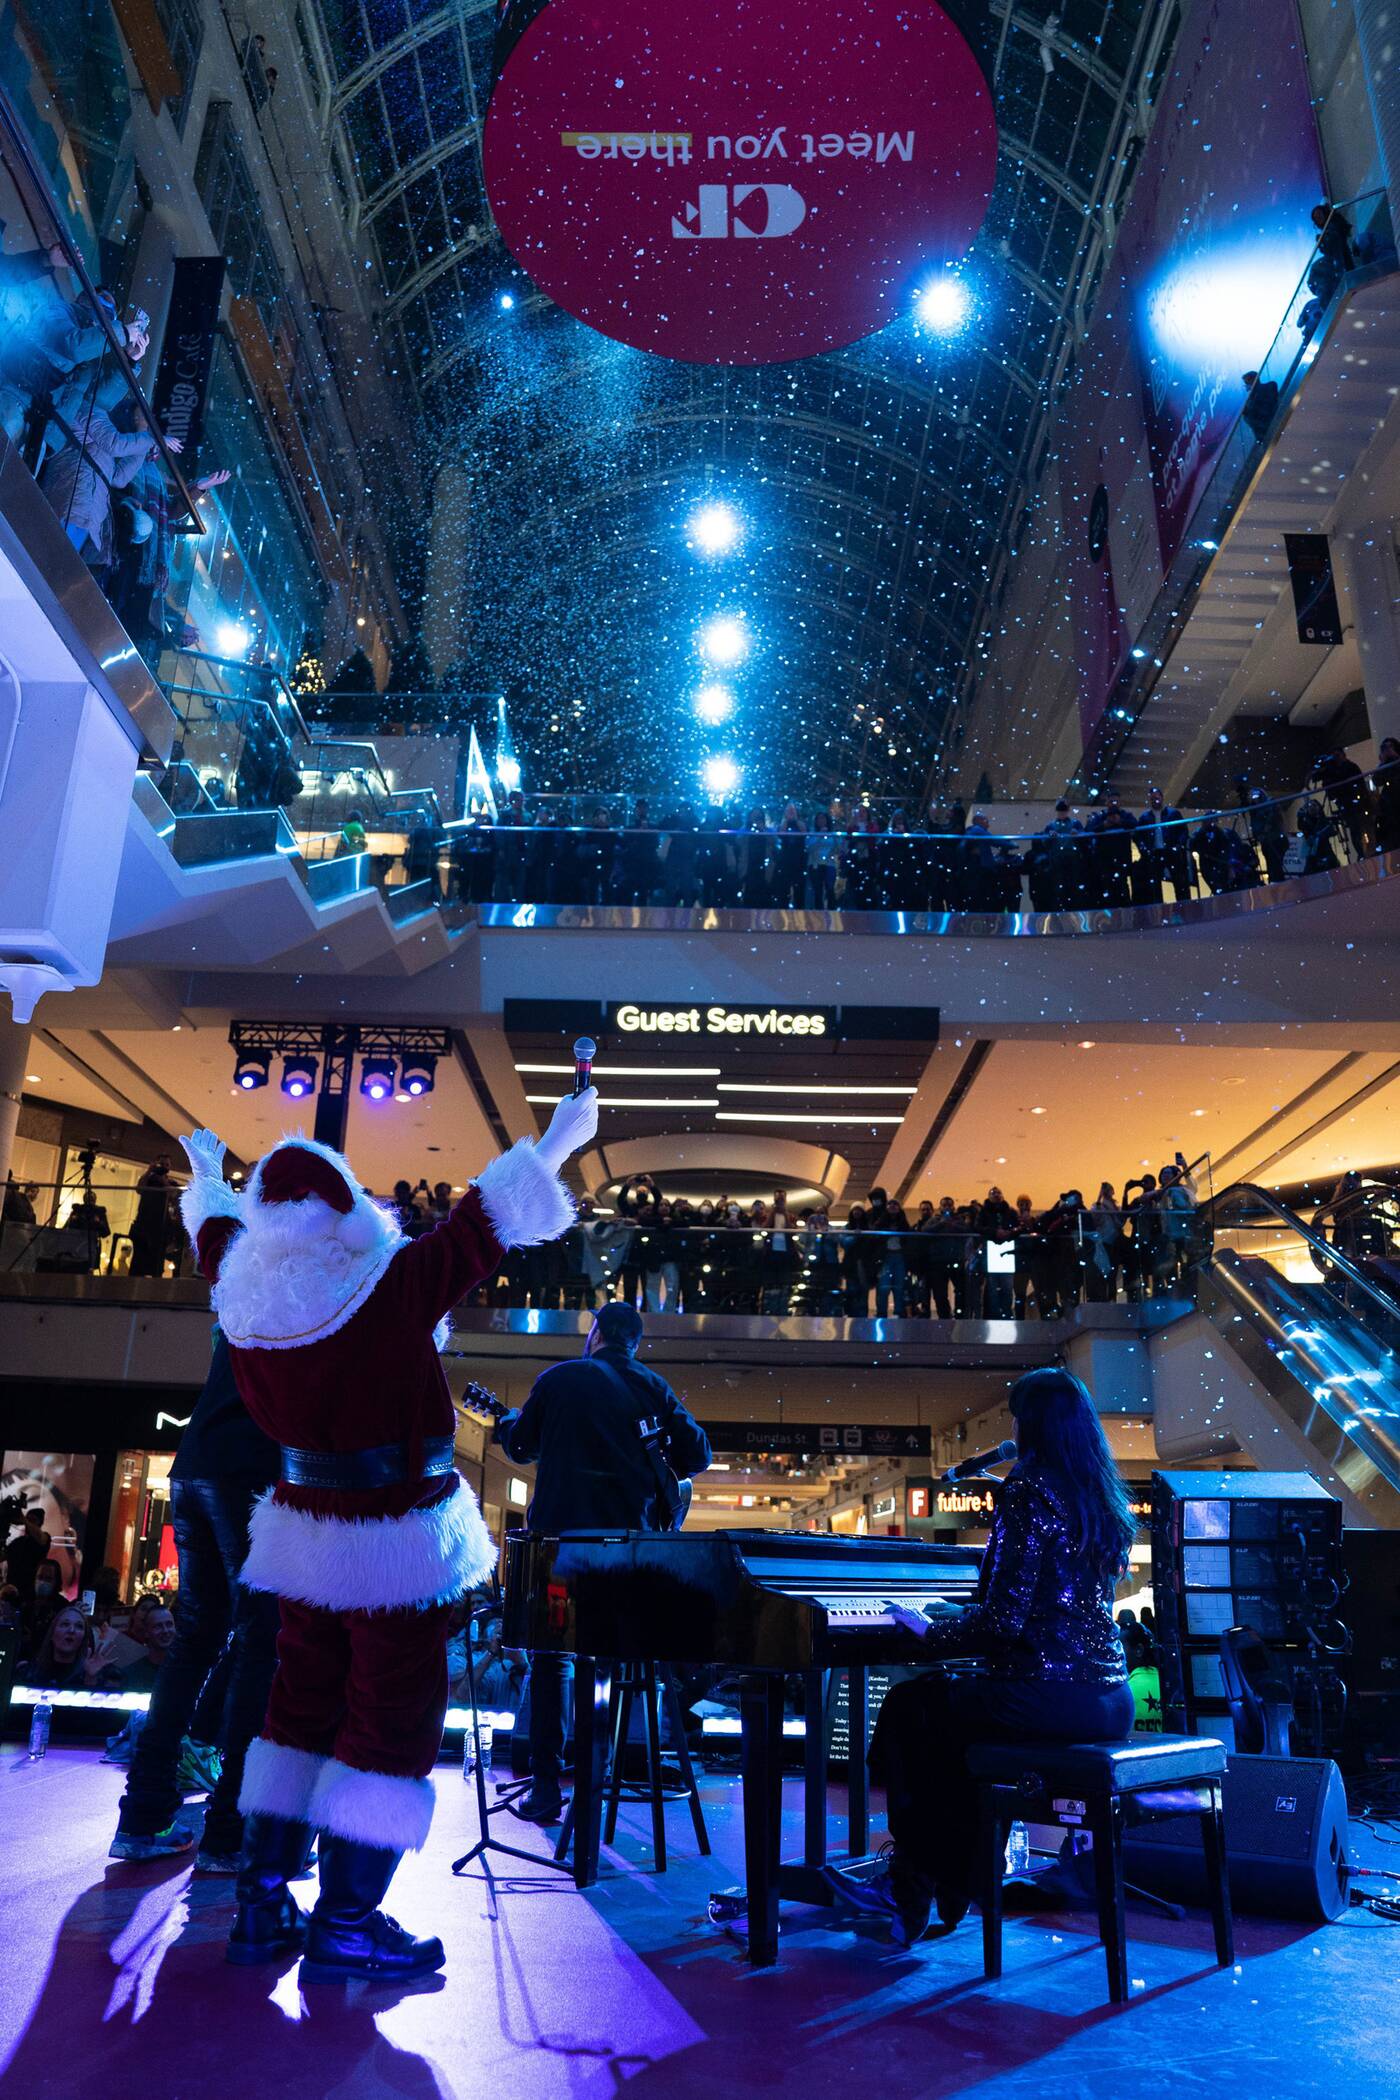 It's actually snowing inside Toronto's Eaton Centre for the 2022